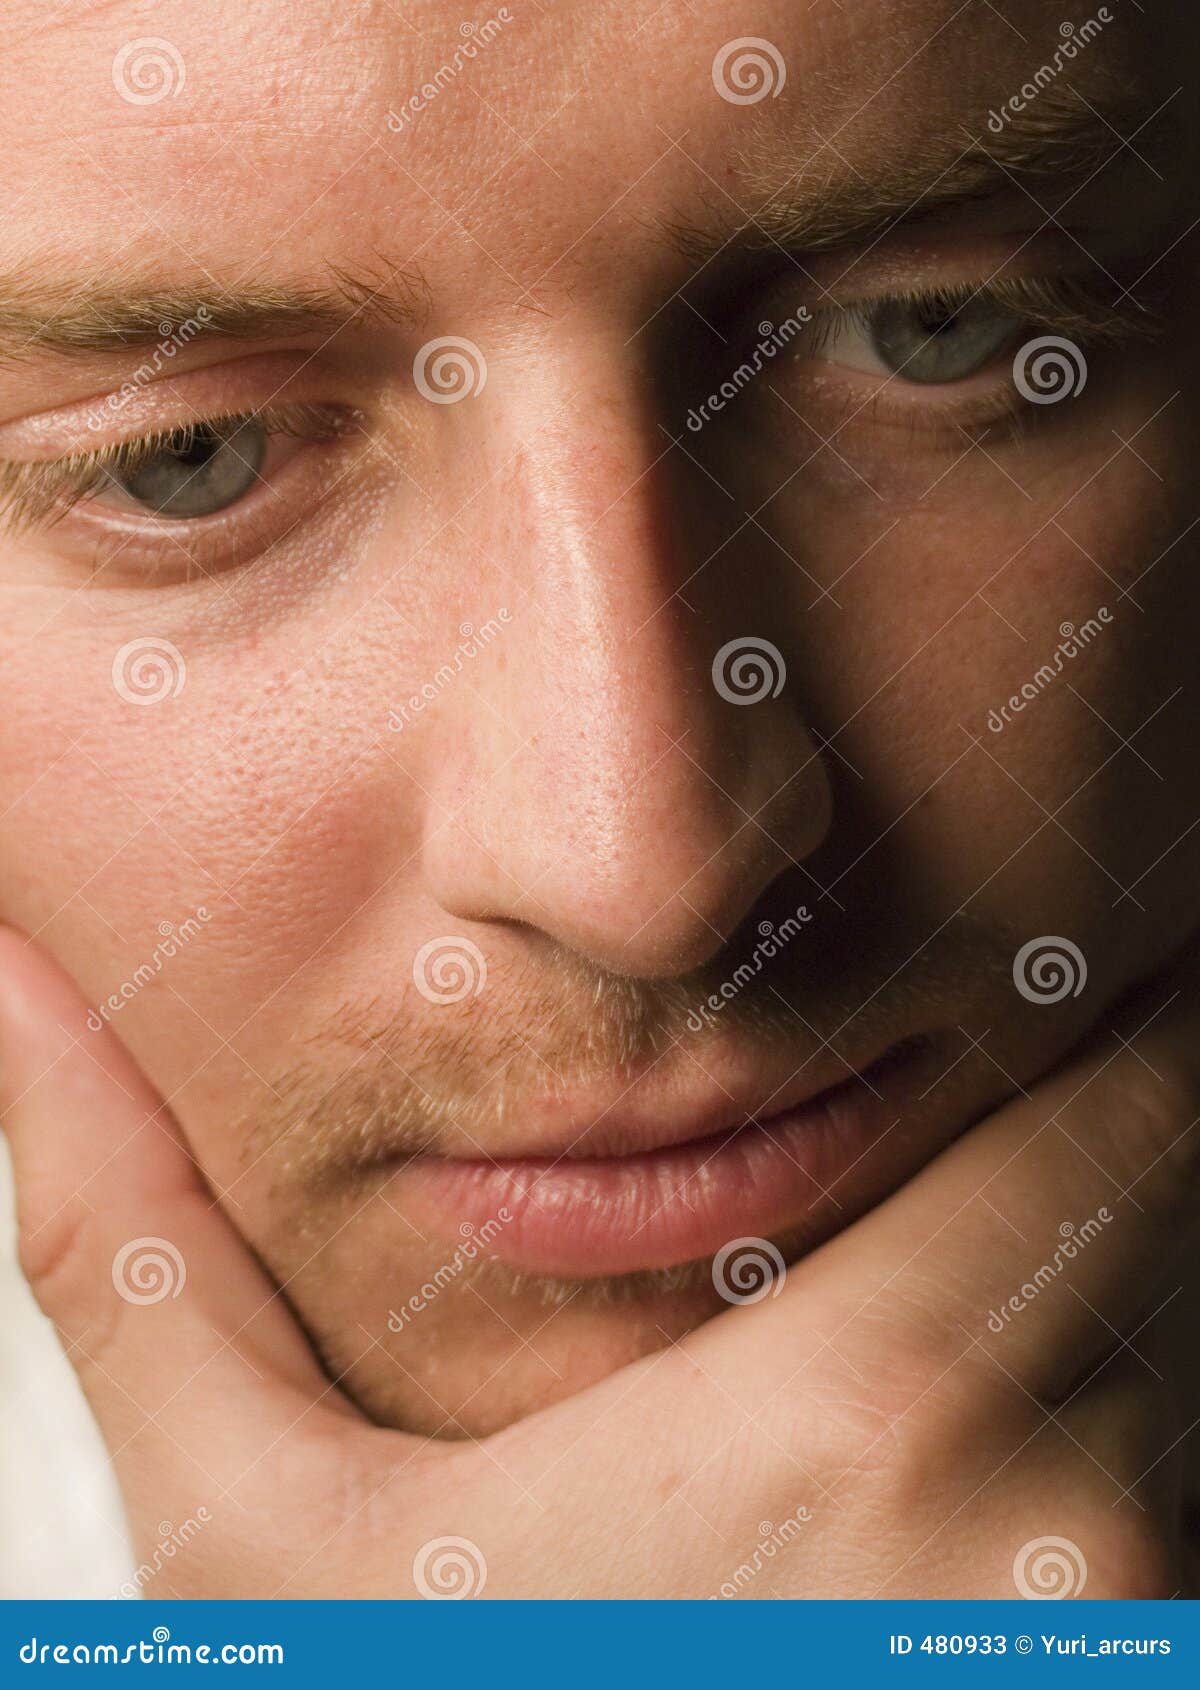 Contemplative man stock image. Image of cool, bothered - 480933